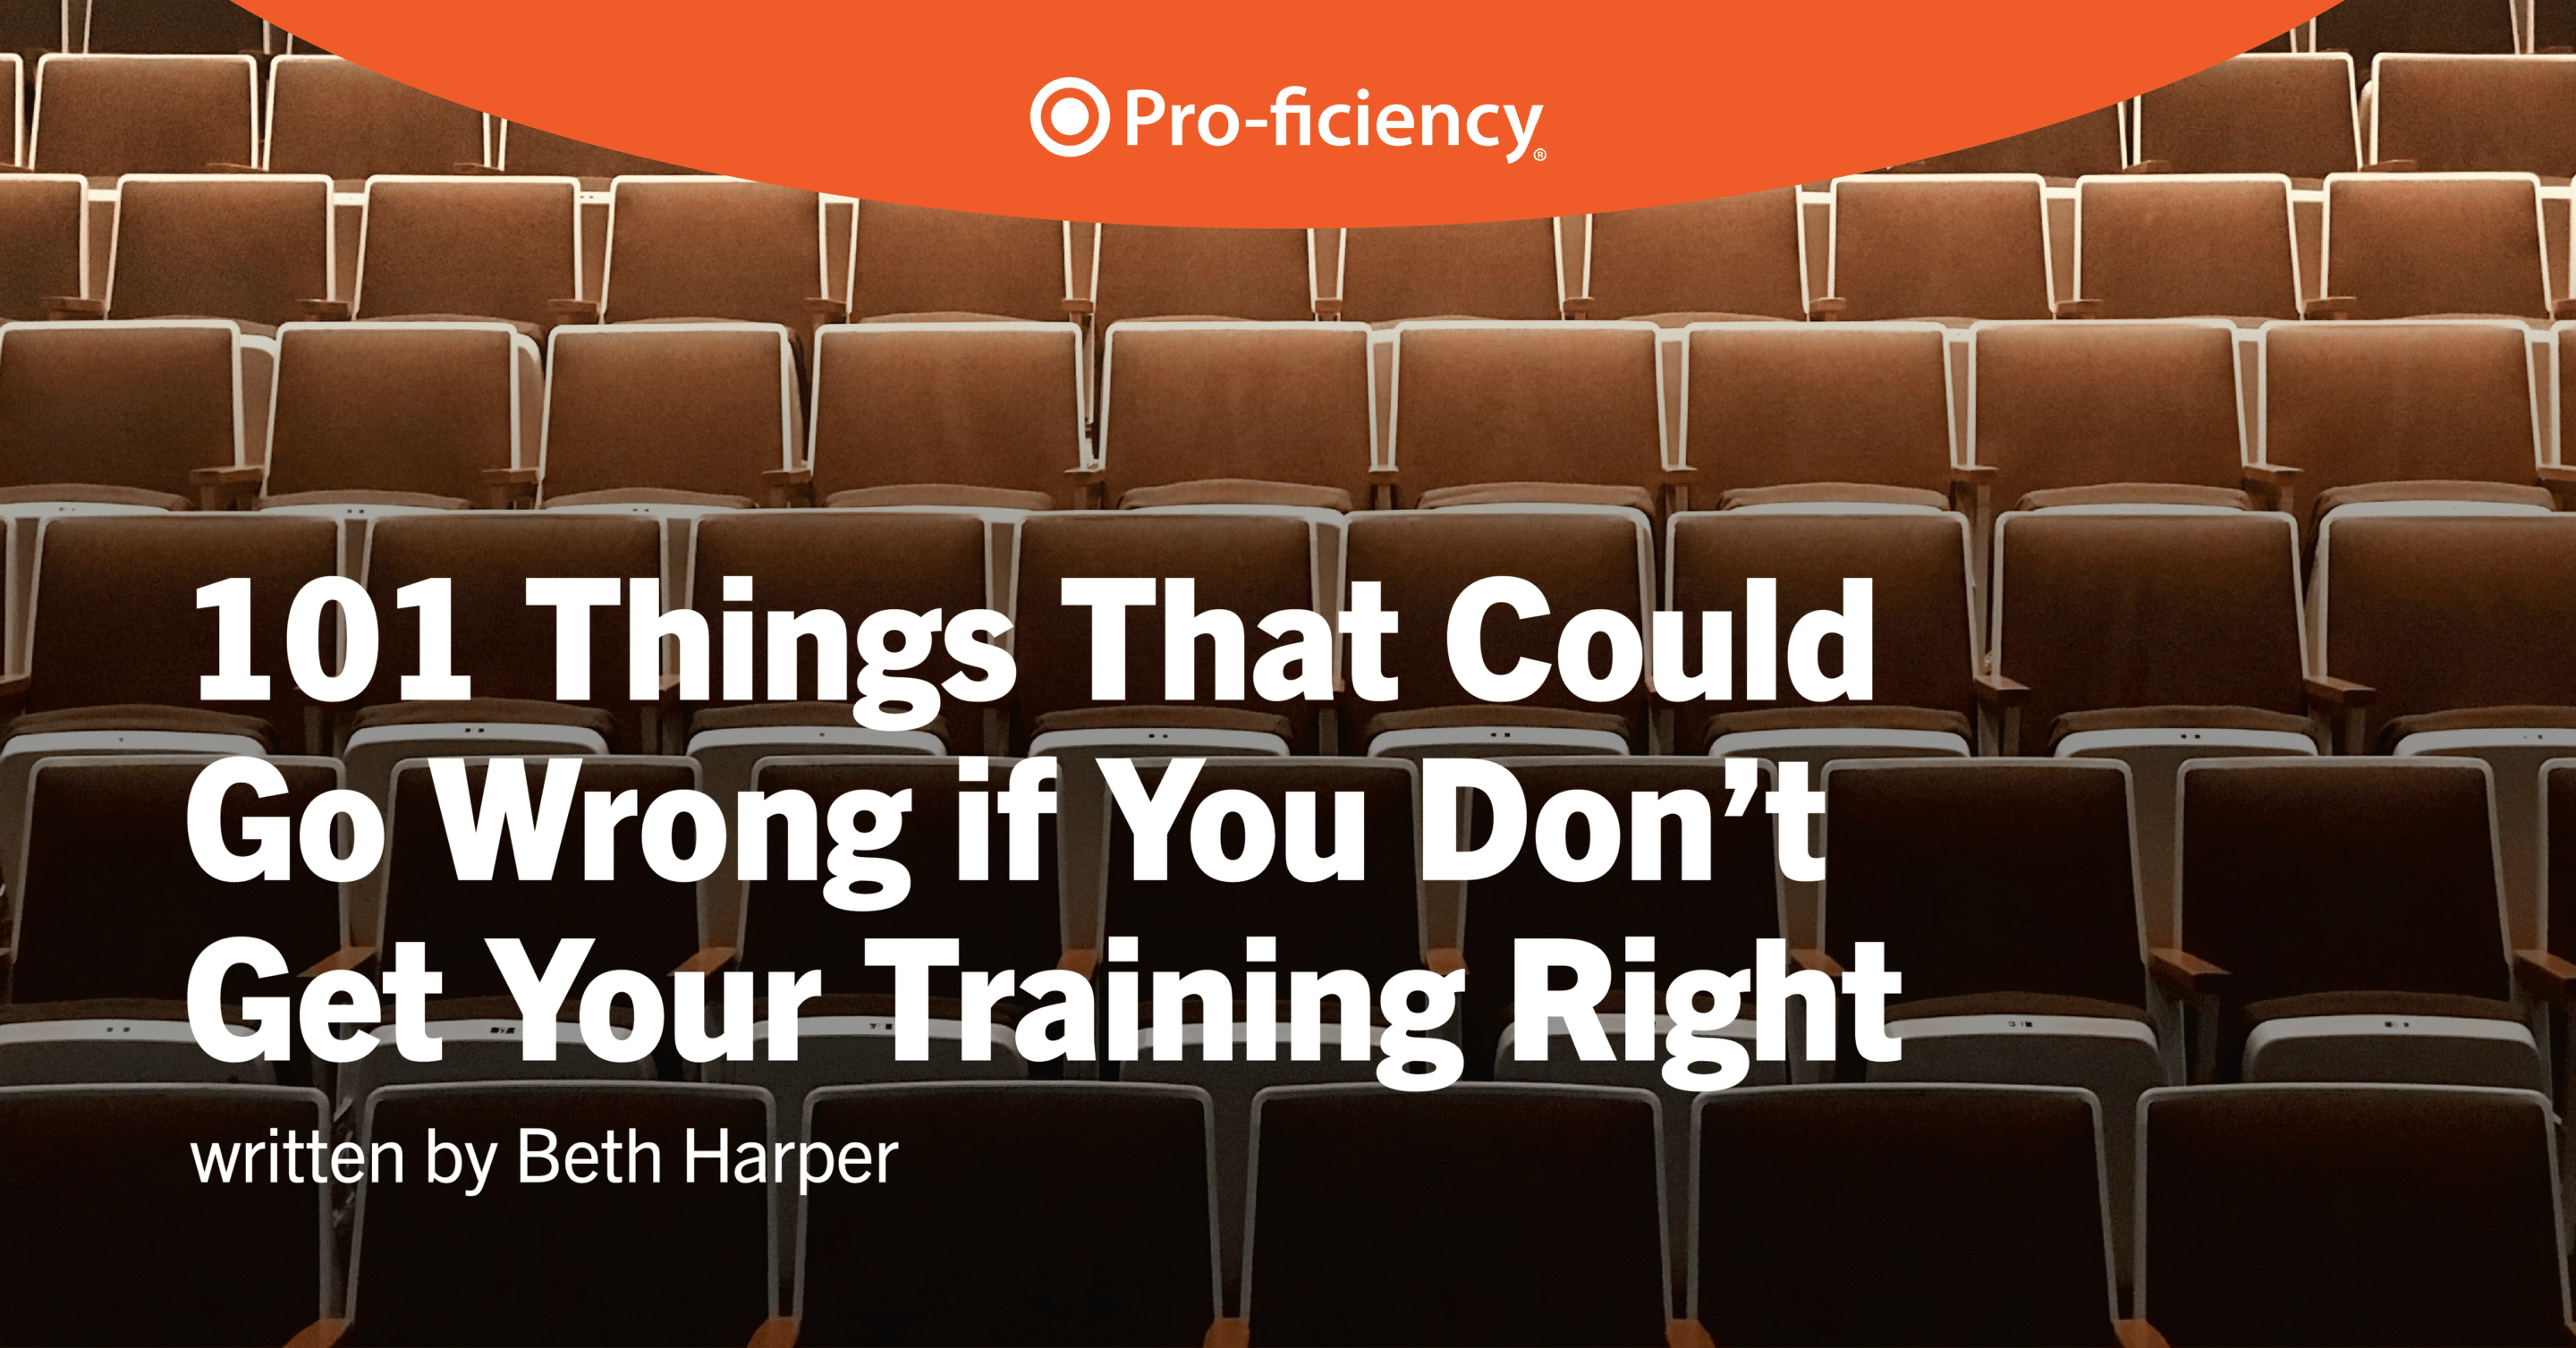 150 Things That Could Go Wrong if You Don’t Get Your Training Right